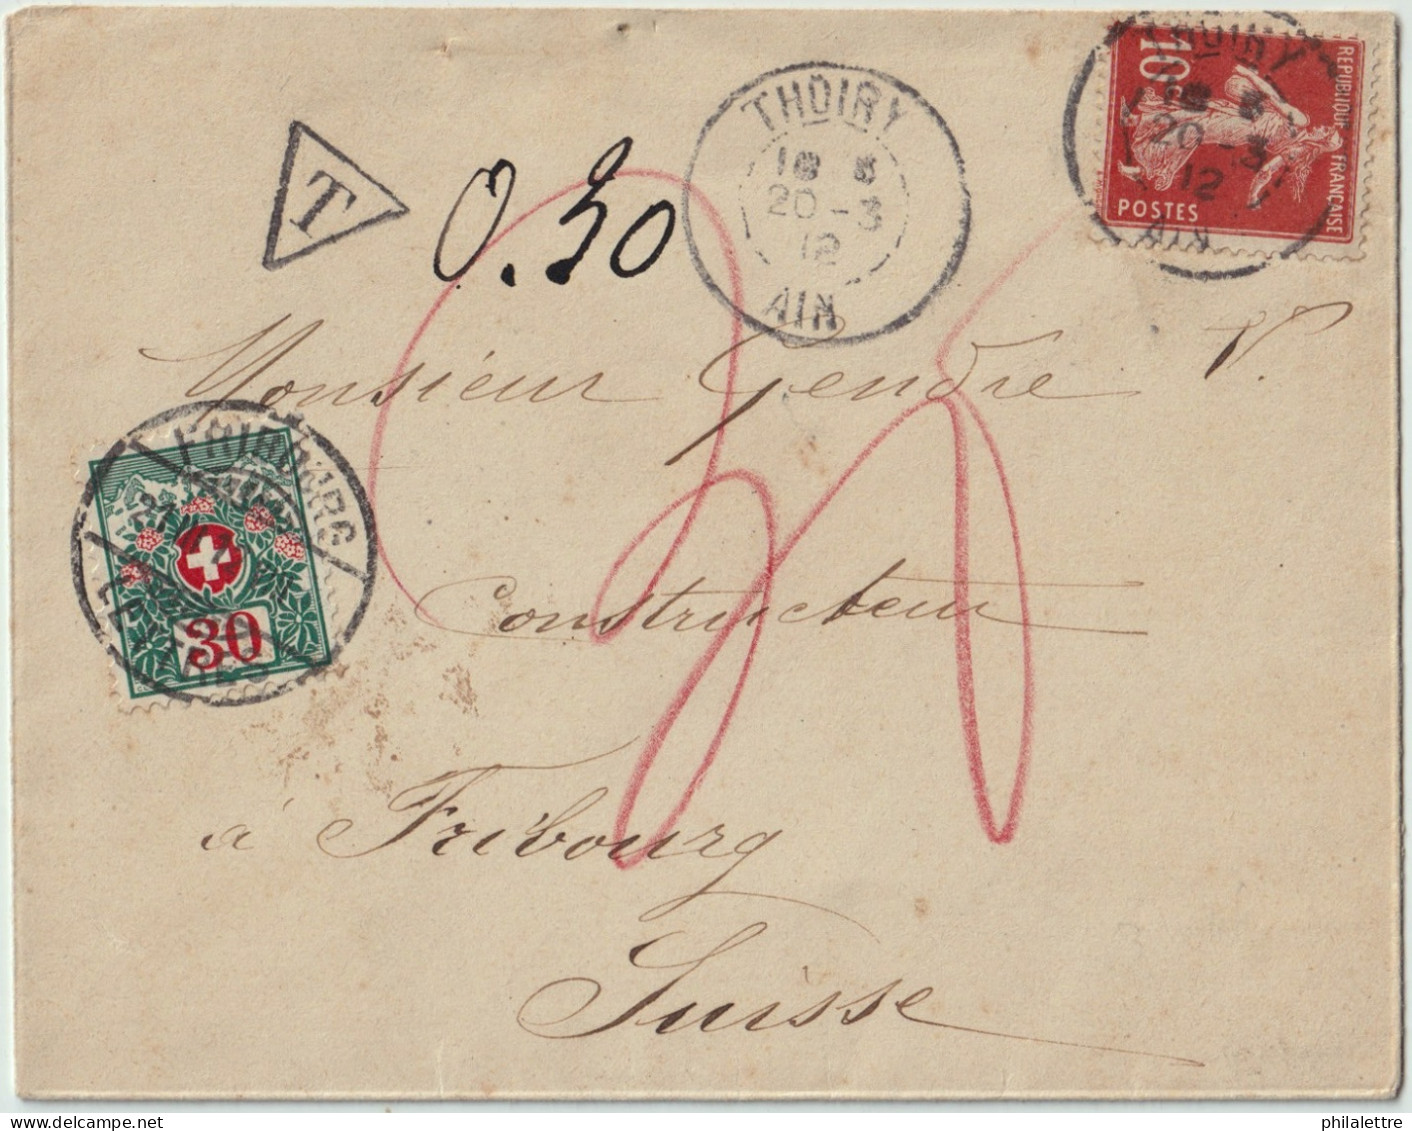 SUISSE / SWITZERLAND 1912 Cover From France To FRIBOURG Franked 10c Instead Of 25c Taxed 0fr30 With Postage Due Mi.36 - Portomarken